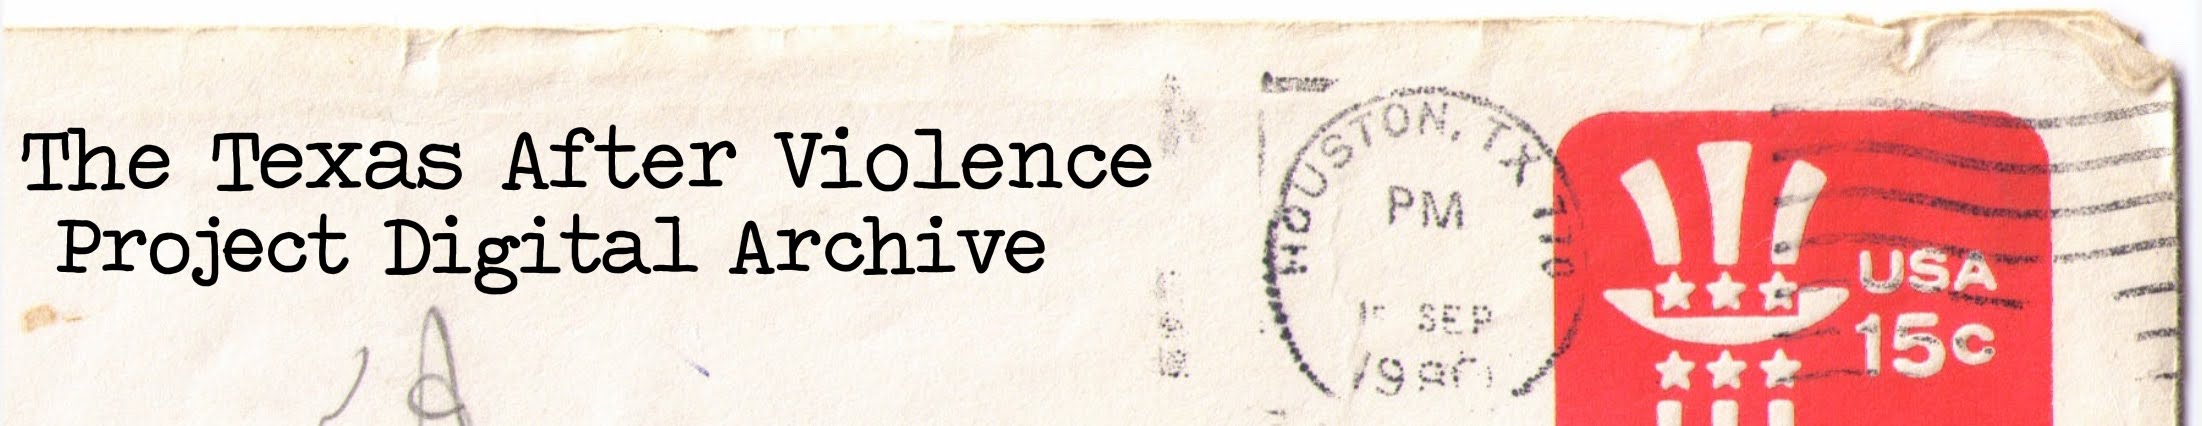 The Texas After Violence Project Digital Archive